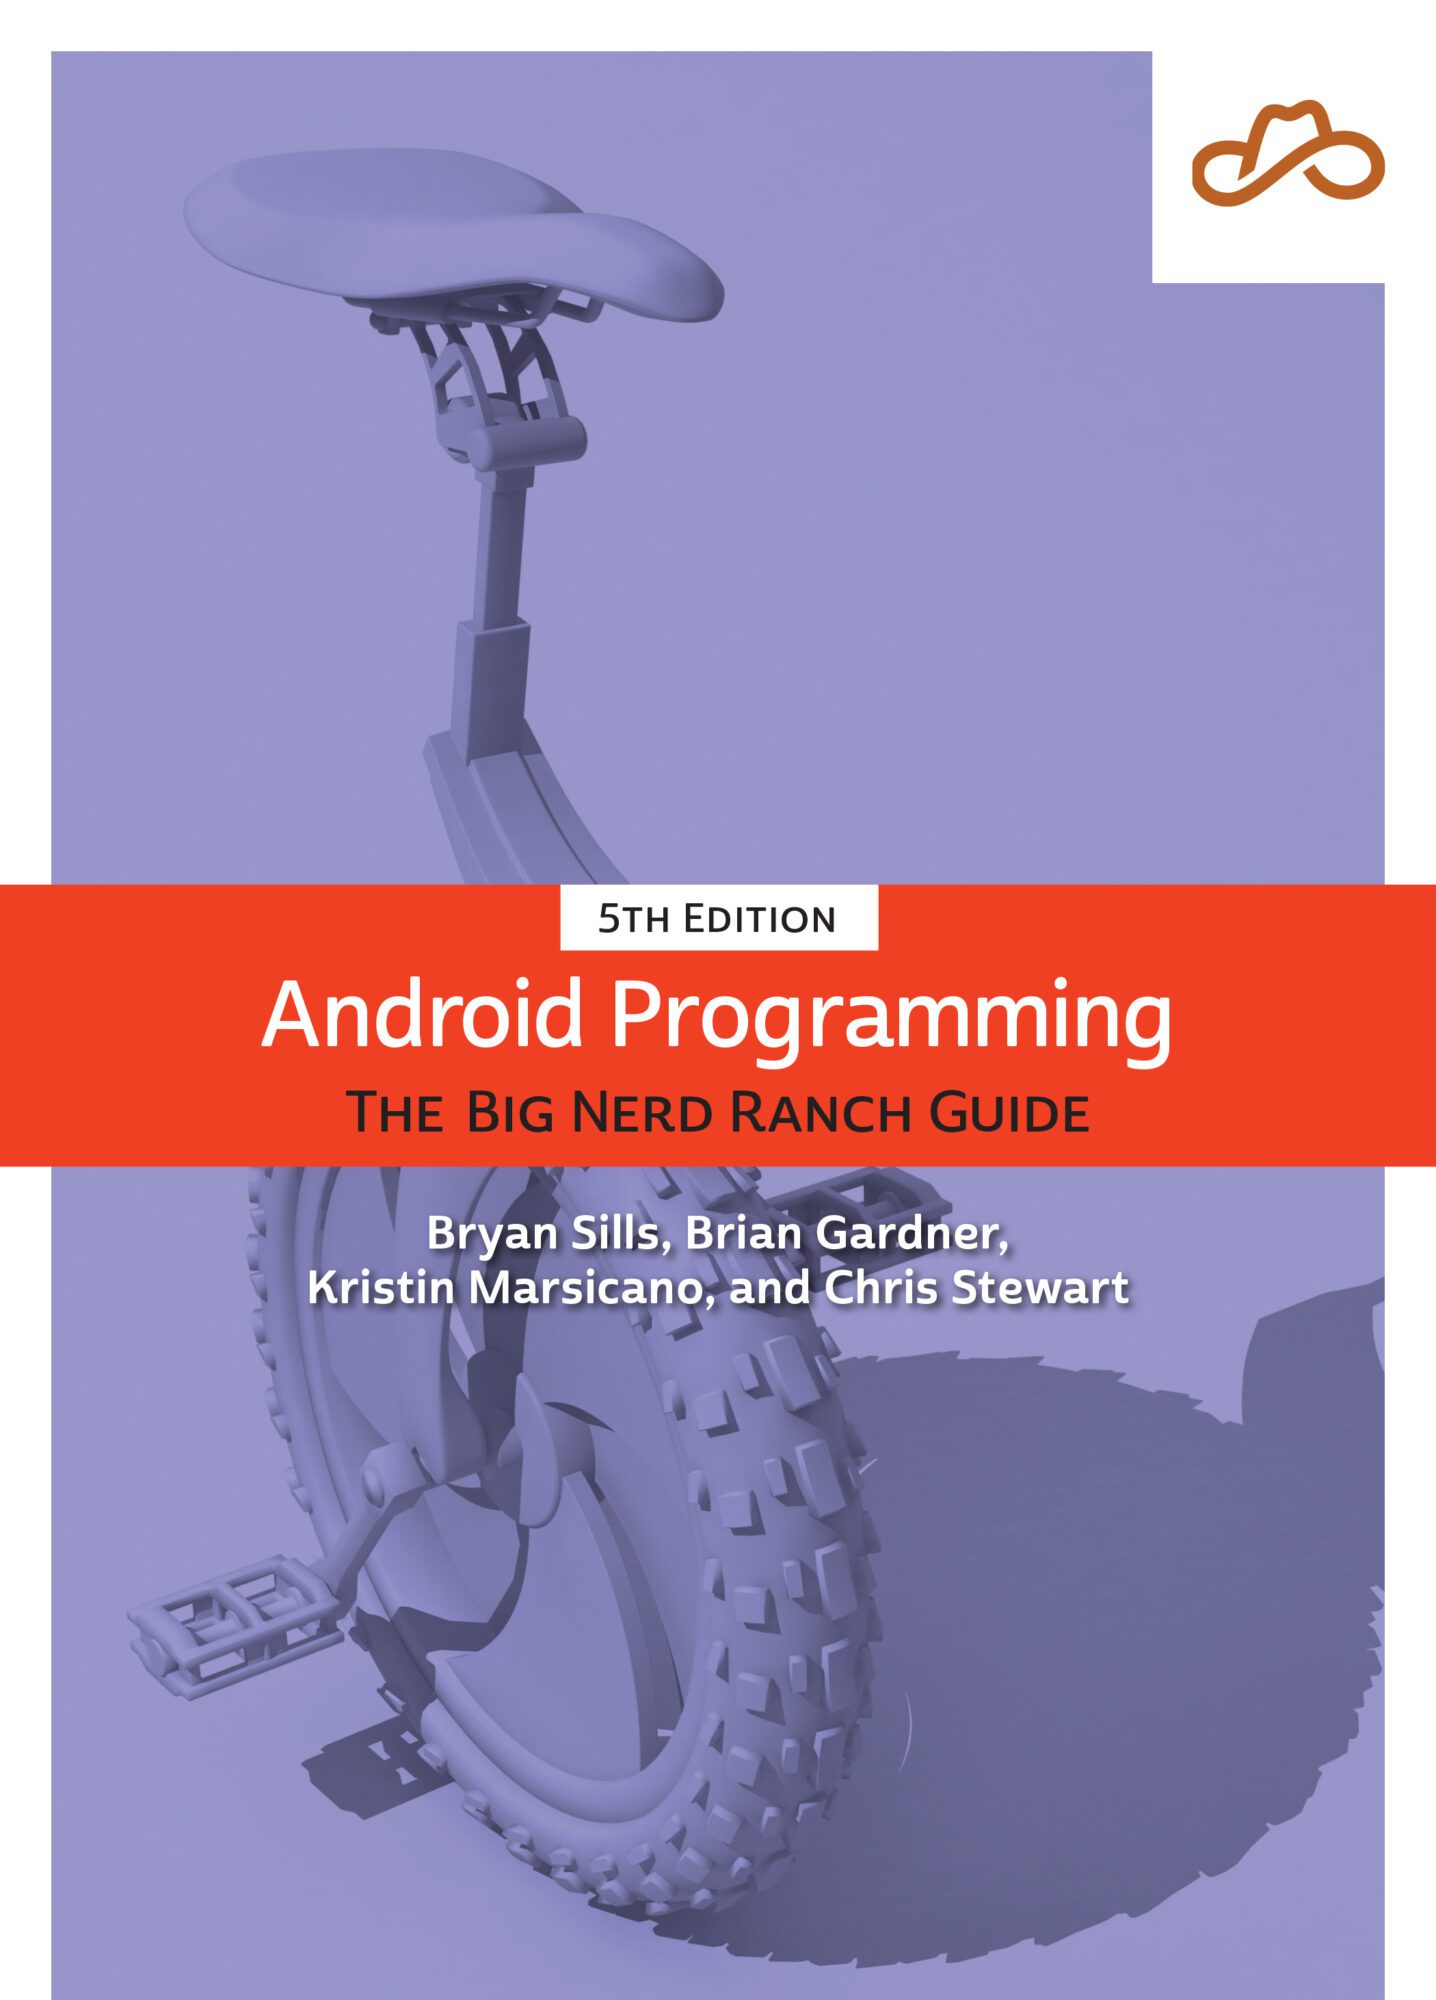 Android Programming: The Big Nerd Ranch Guide (5th Edition)